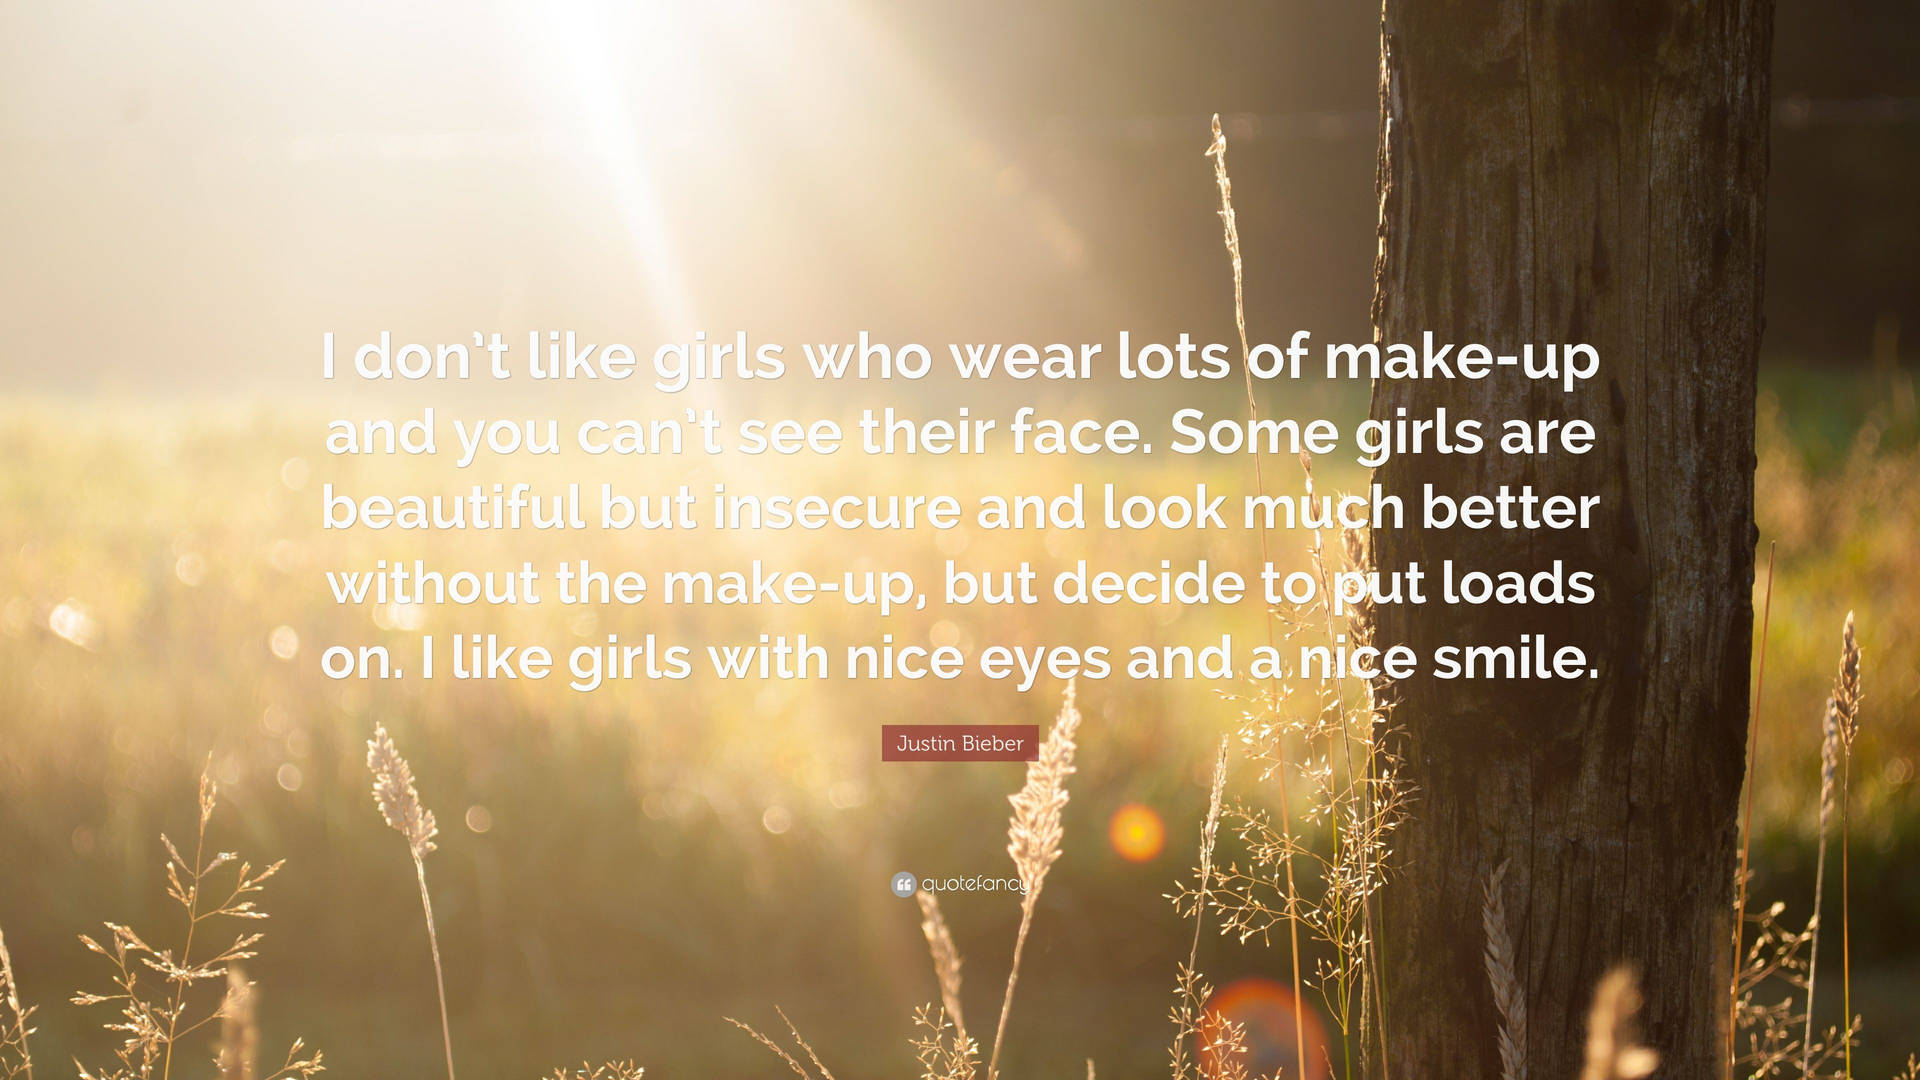 Justin Bieber Insecure Girls Quote Wallpaper